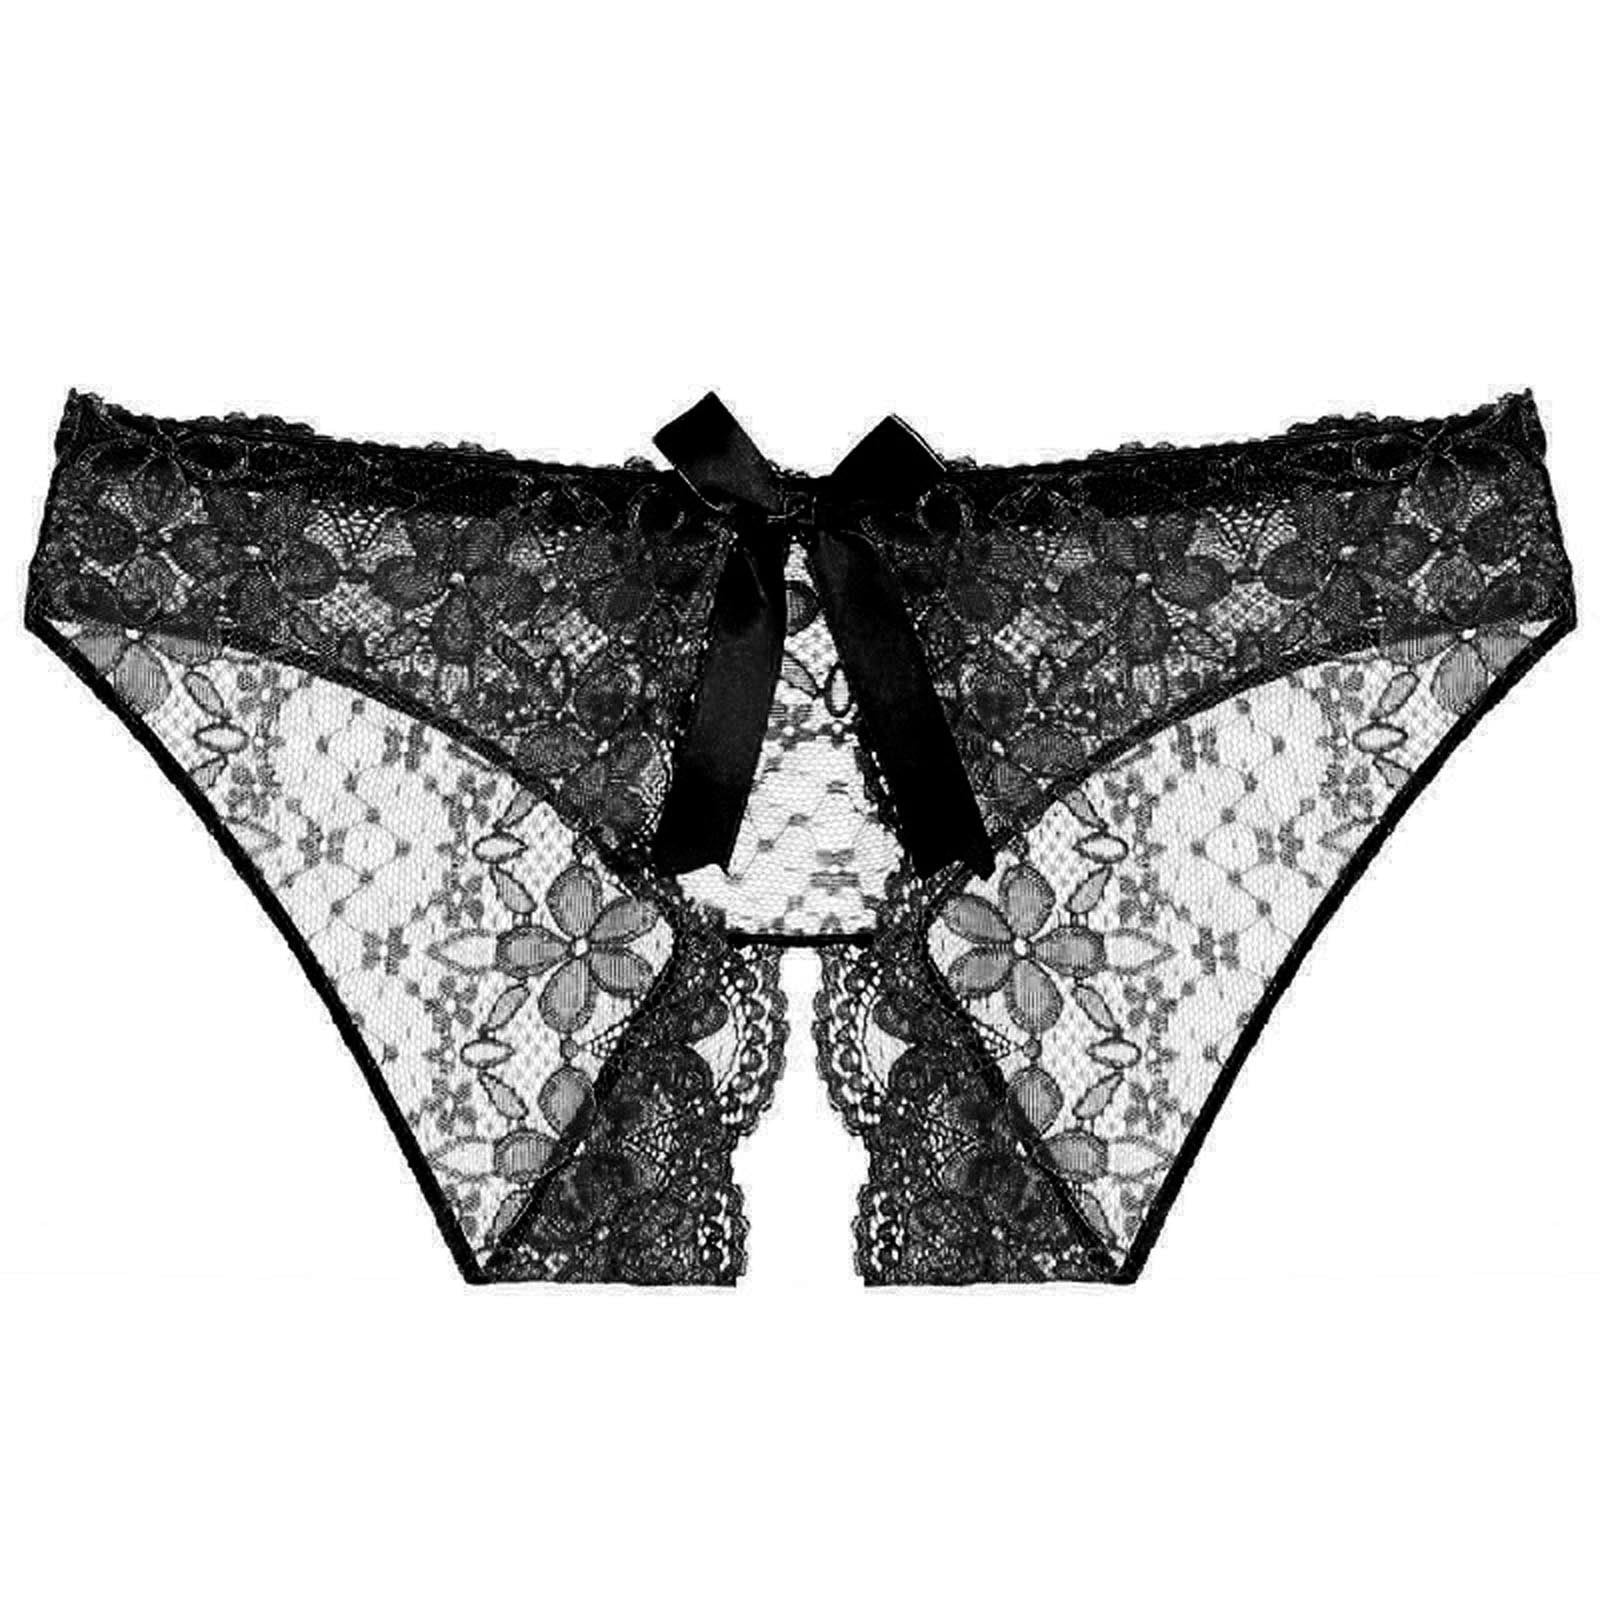 Crotchless Panties Lingerie For Women Lace Floral Hollow Out Panties Low  Rise Bowknot Cheeky Briefs T Back Bikini Underpants